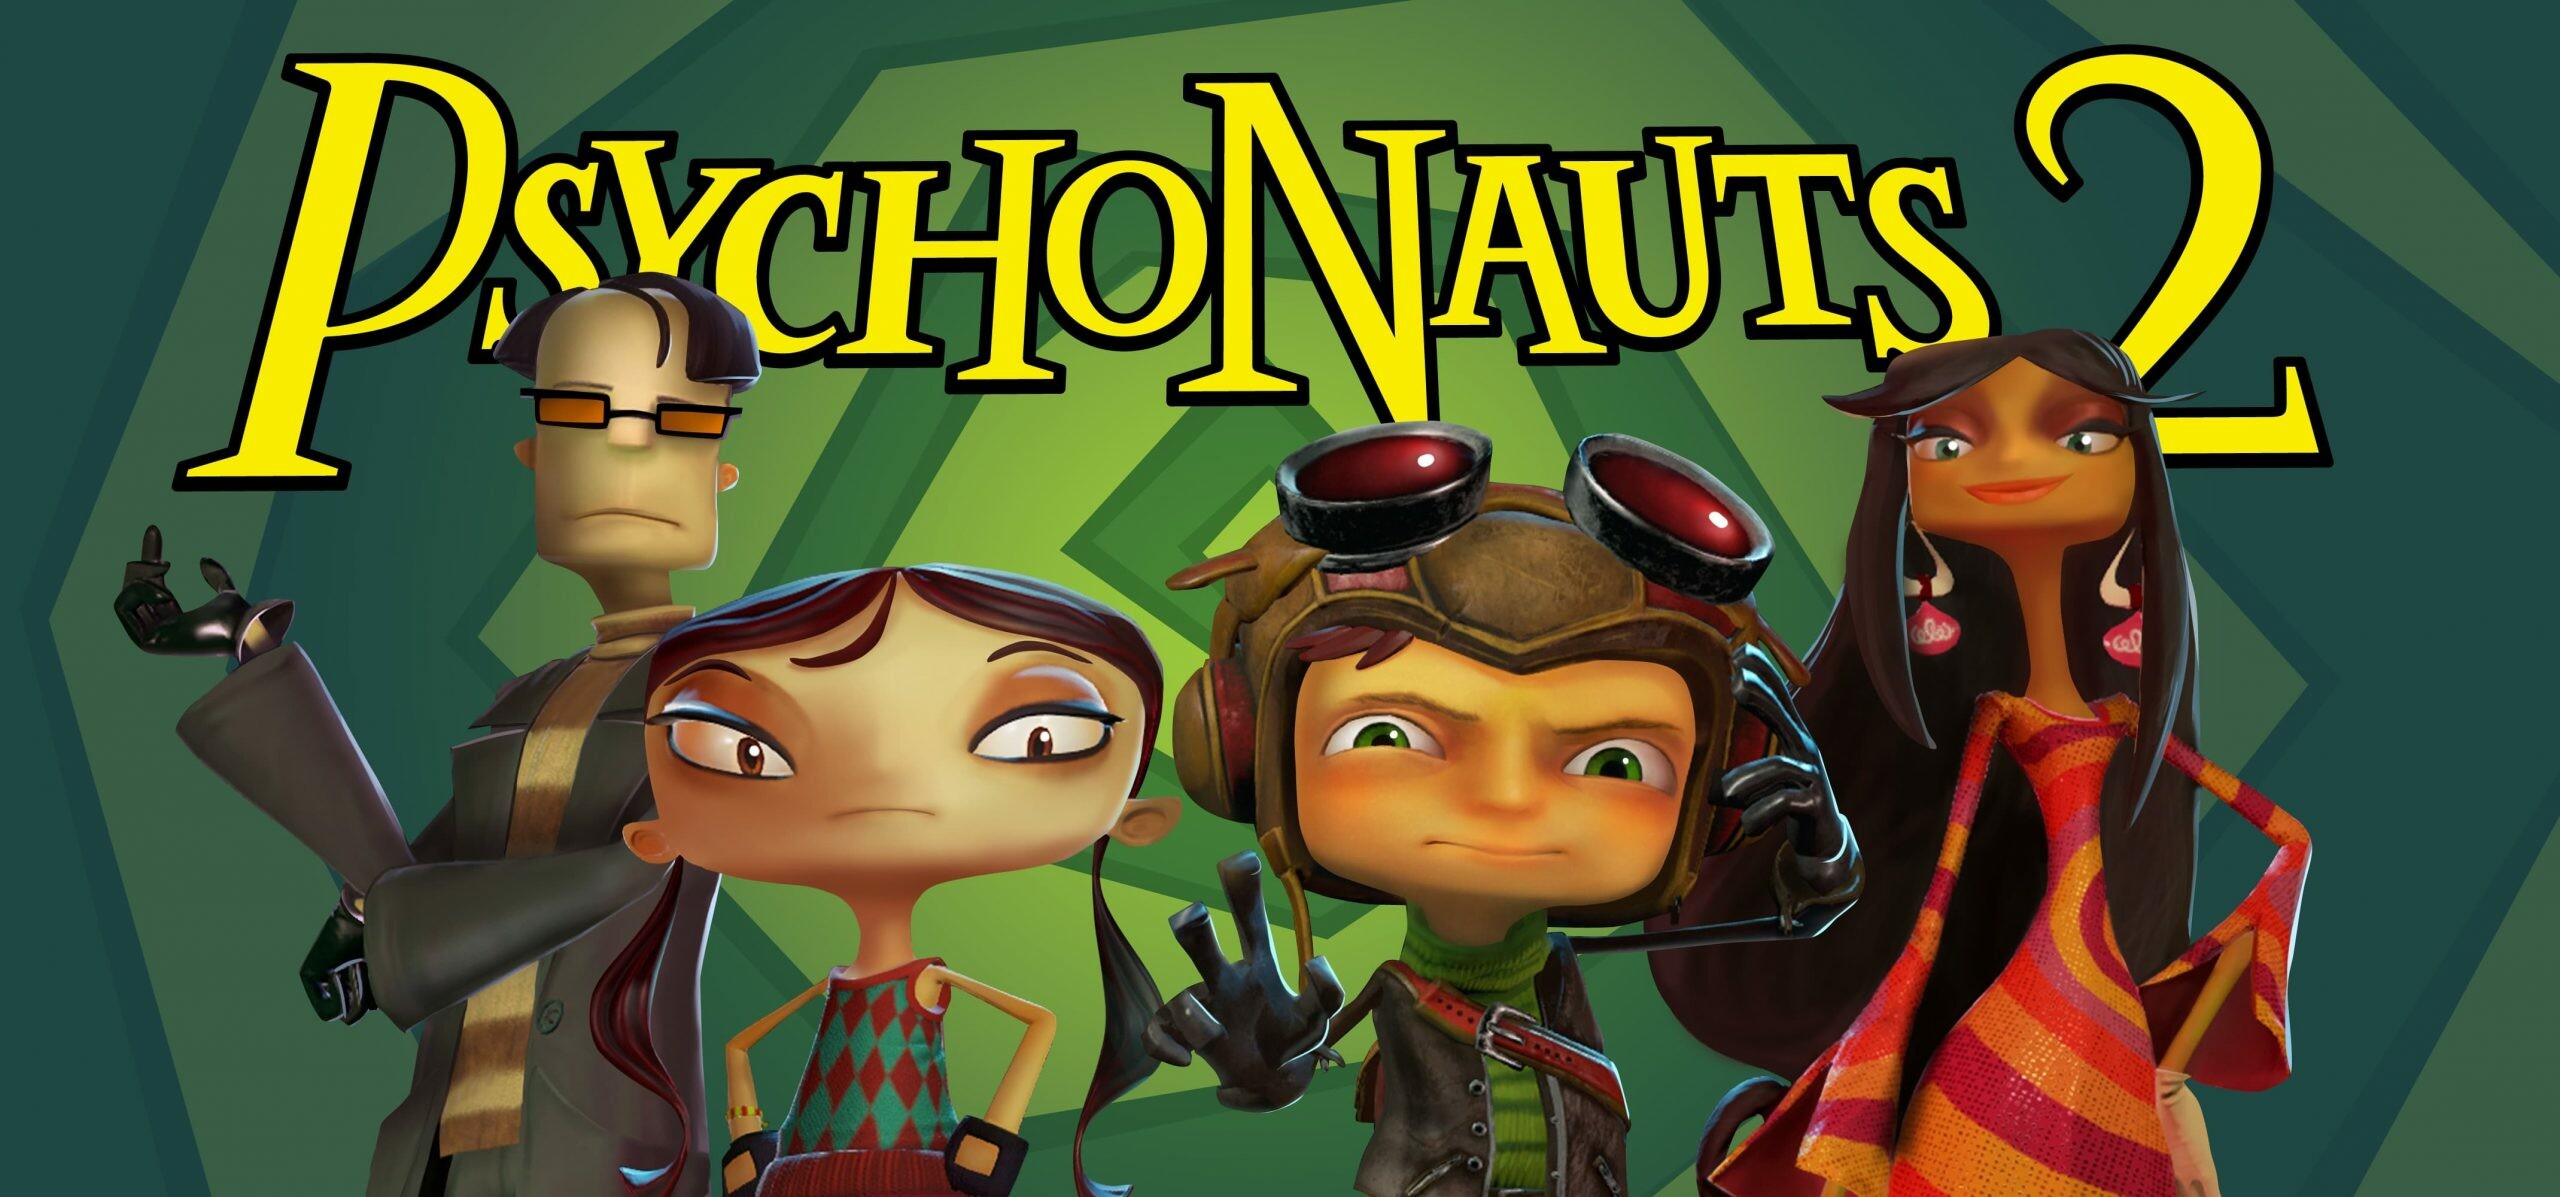 Psychonauts 2: A platform game developed by Double Fine and published by Xbox Game Studios. 2560x1200 Dual Screen Background.